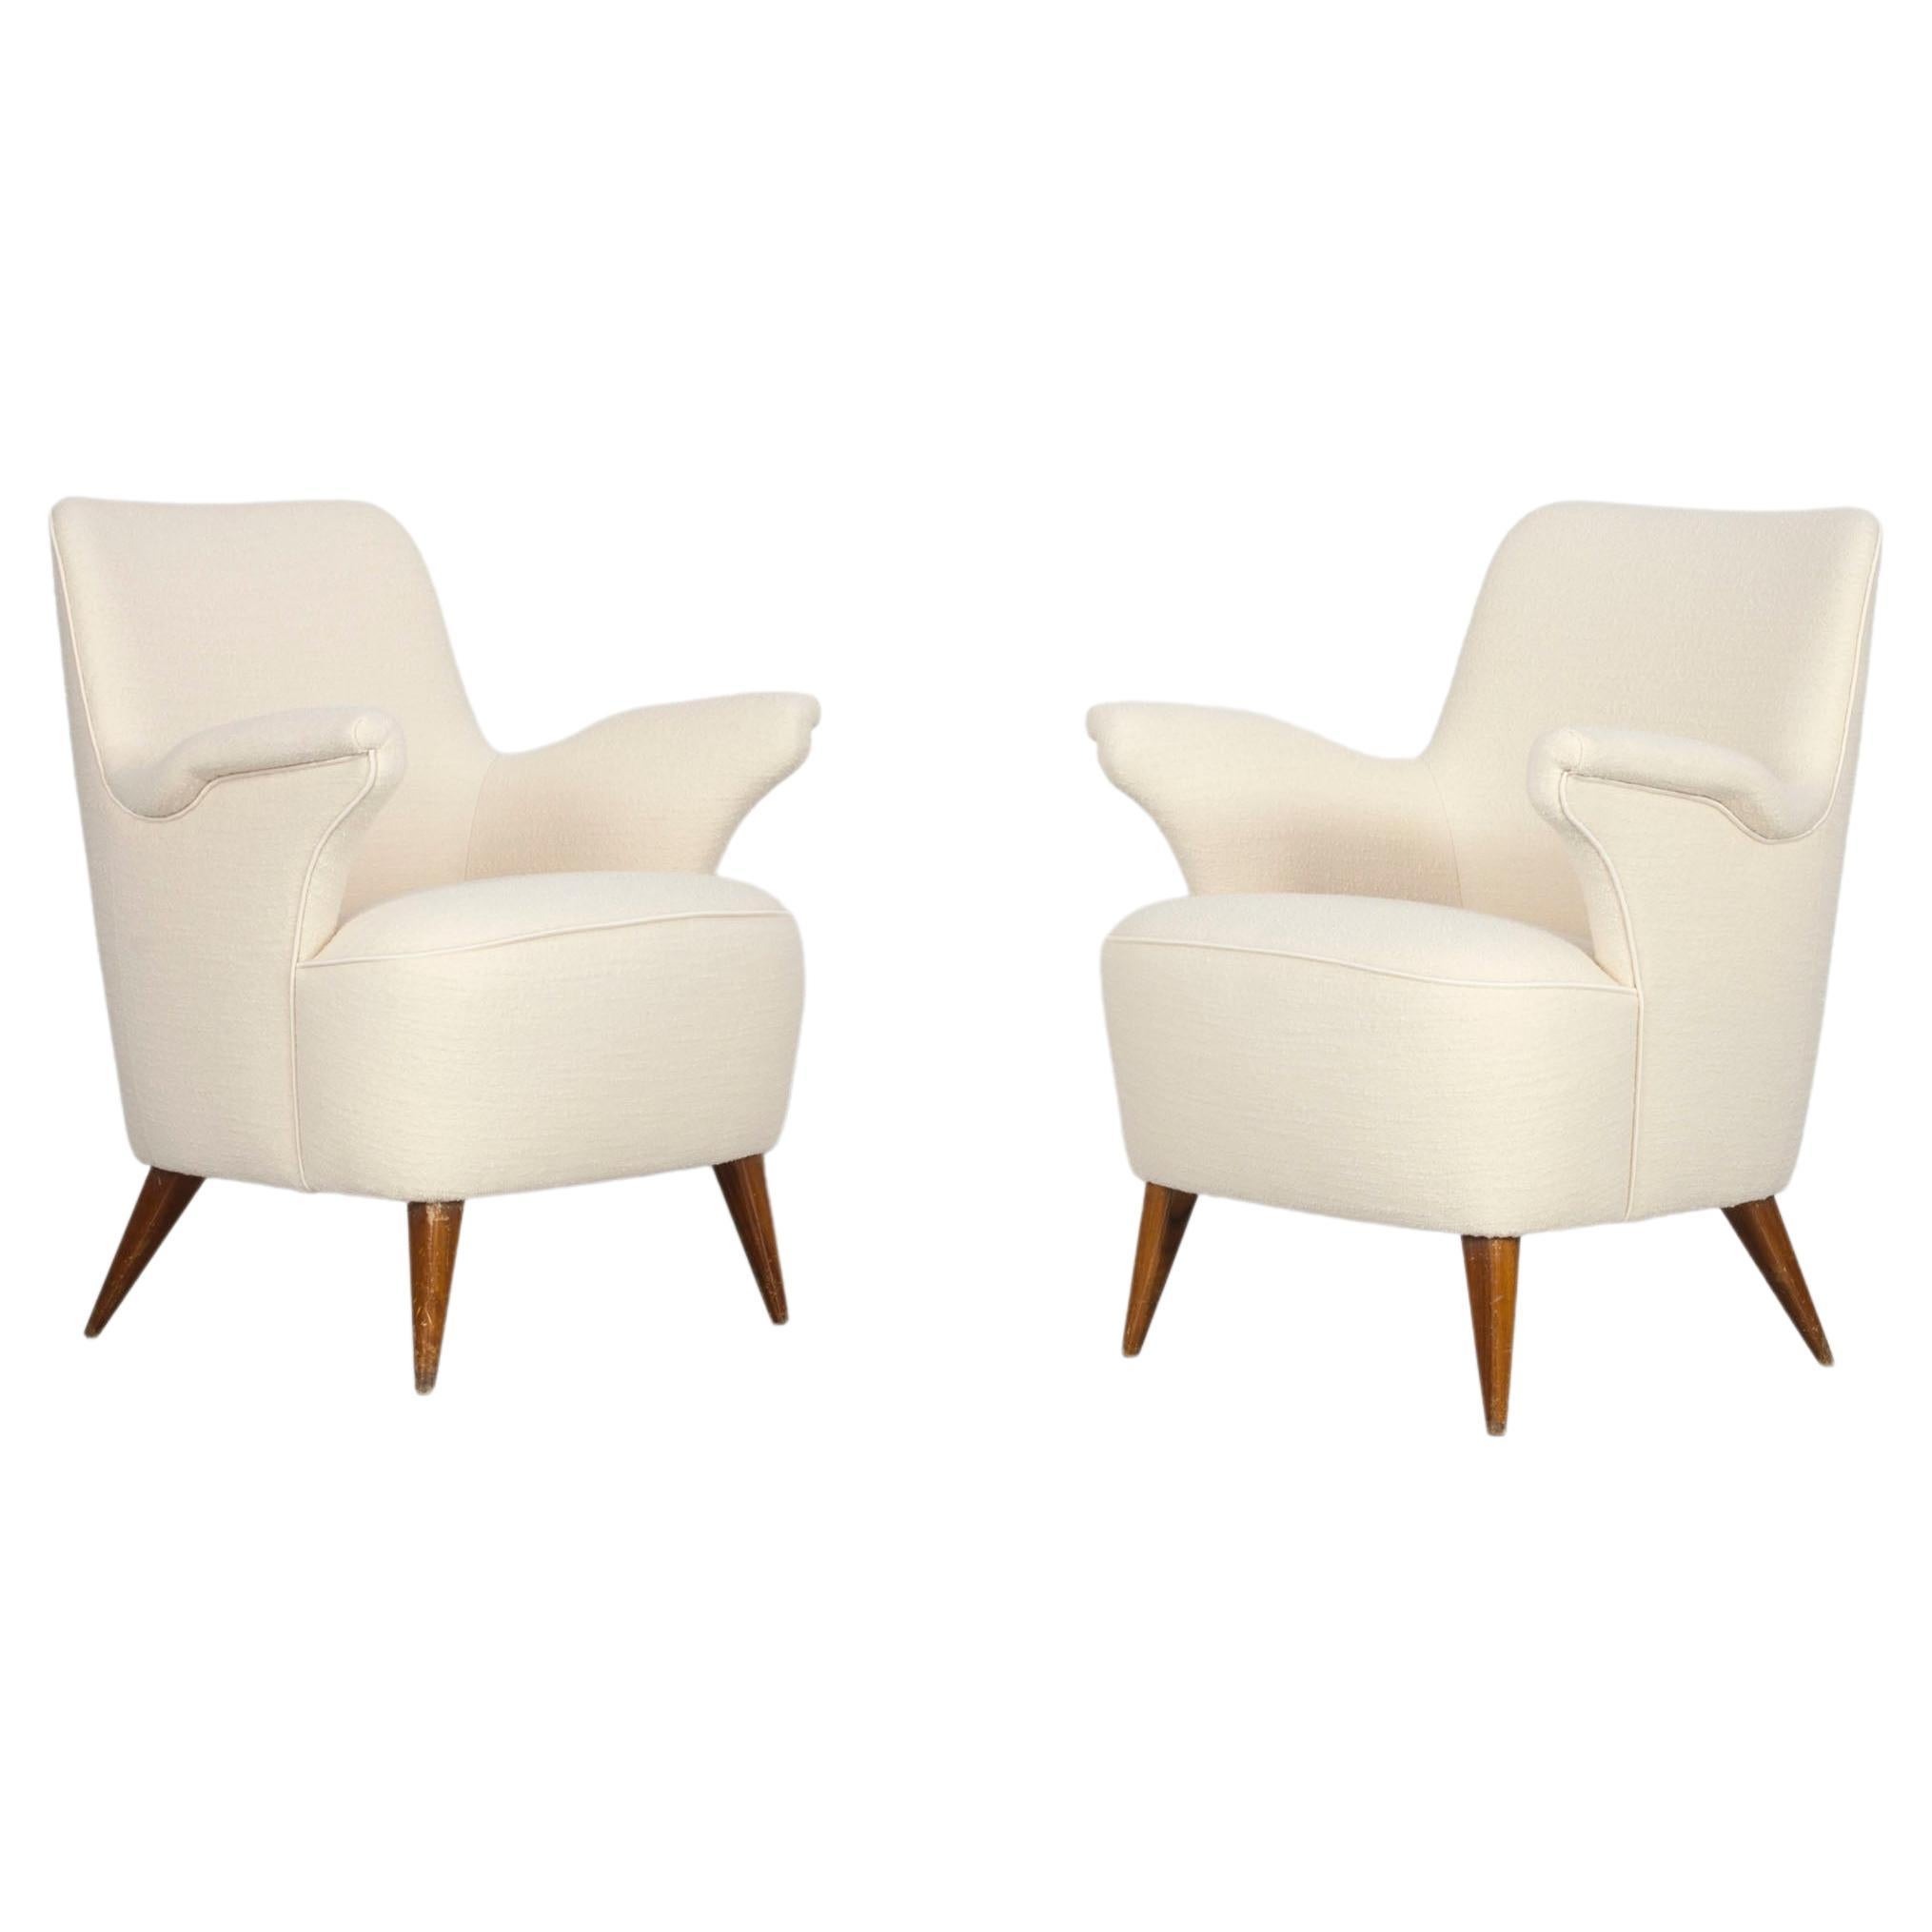 Set of 2 Cream Coloured Italian Marine Armchairs from the 1950s For Sale